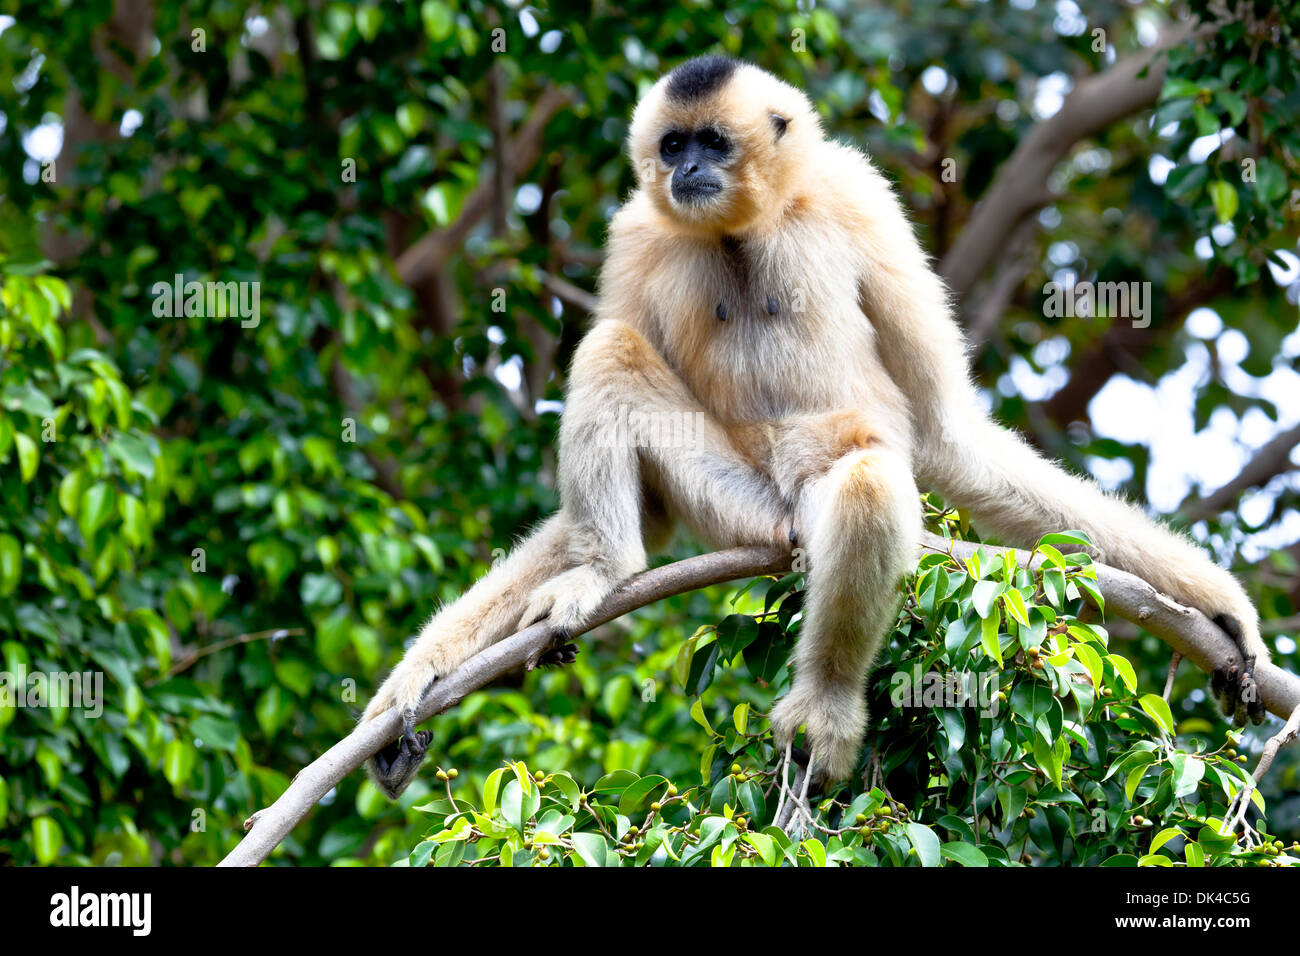 Gibbon Sitting Playing Against Background Green Stock Photo 635216018   Shutterstock